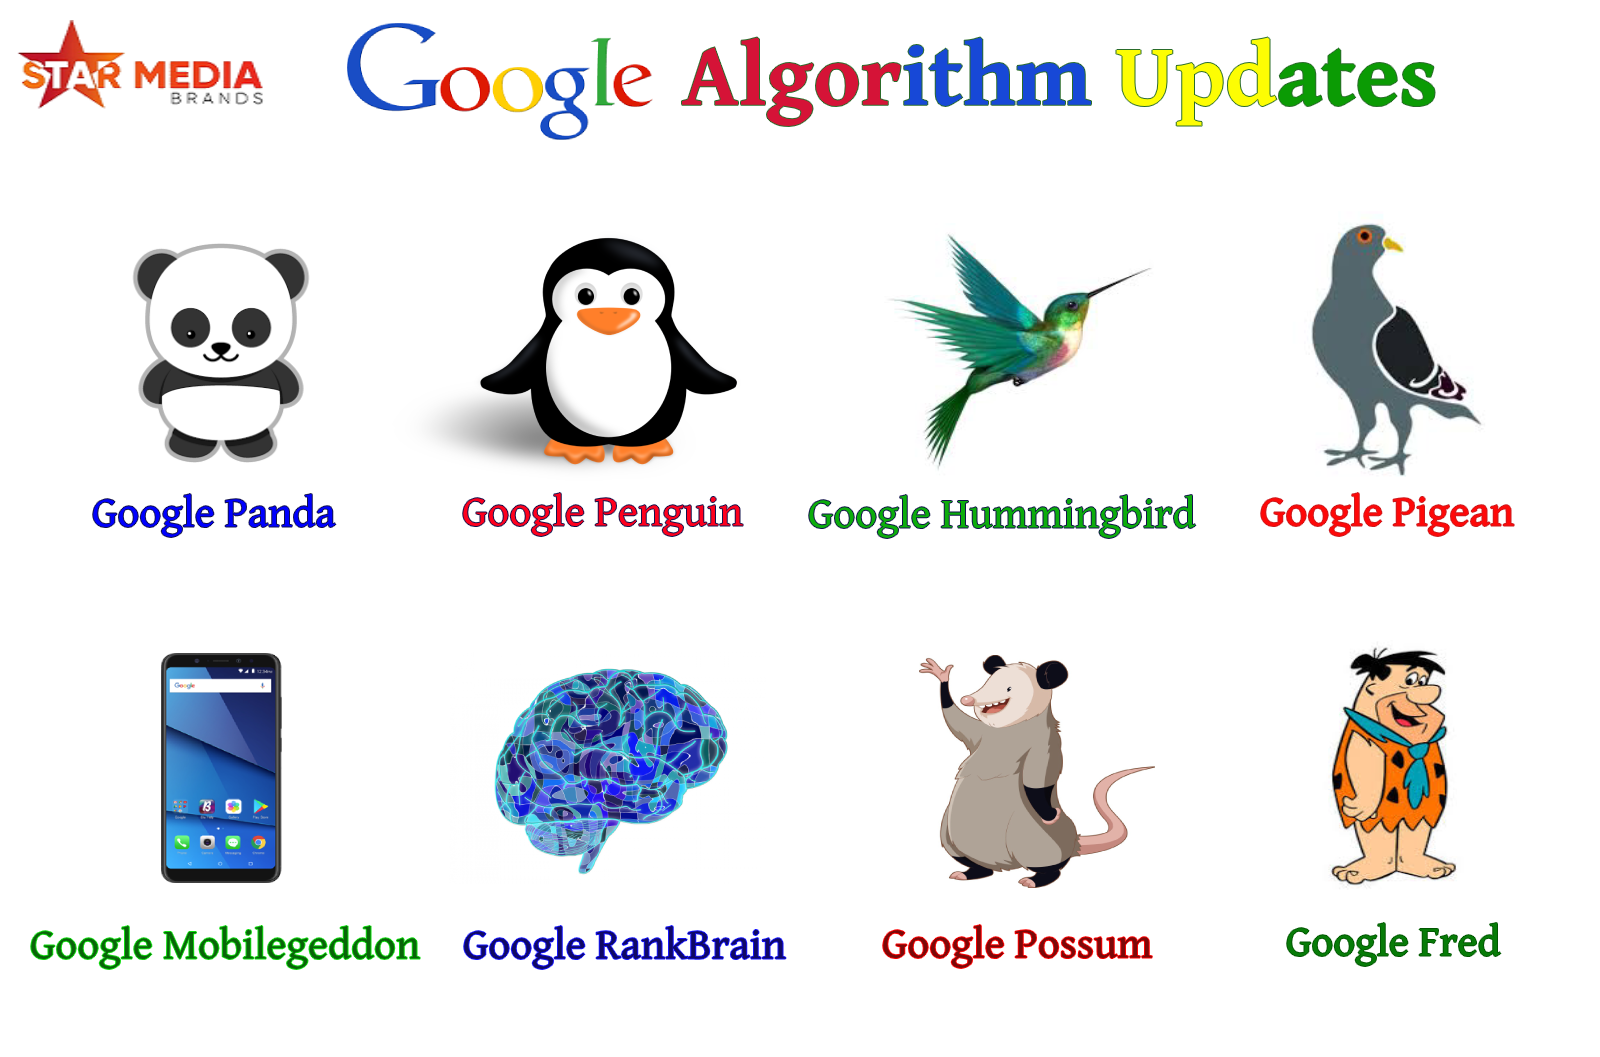 Learn About The Google Algorithm Updates